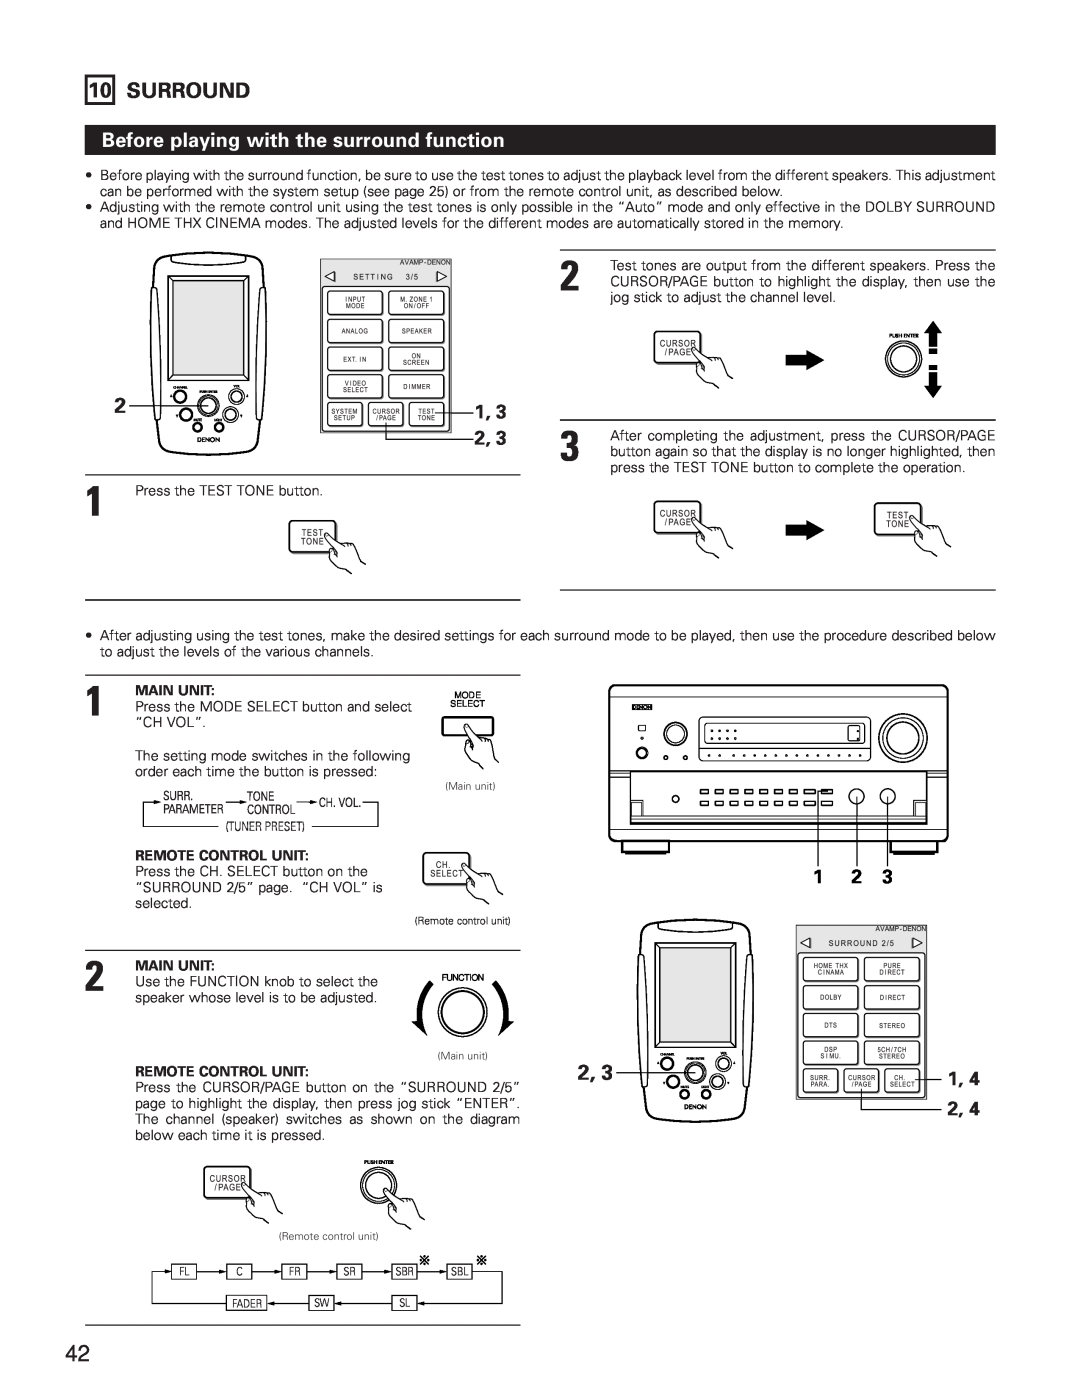 Denon AVR-5800 operating instructions Surround, Before playing with the surround function, Main Unit, Remote Control Unit 